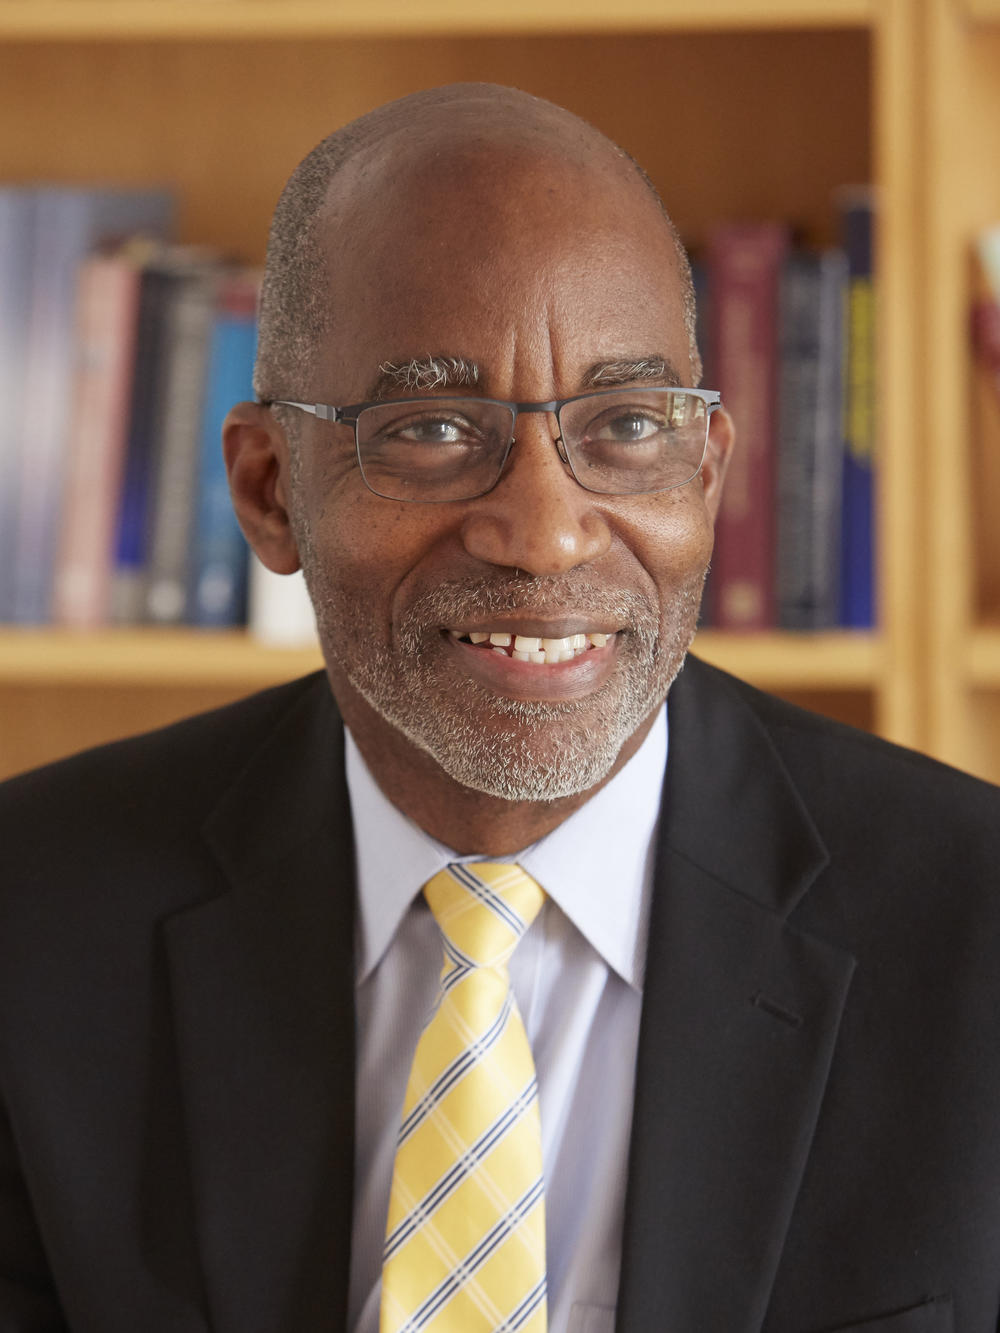 David Williams, a professor of public health at Harvard University, says the cumulative effect of discrimination takes a toll psychologically and physiologically ― and so does the anticipation of it